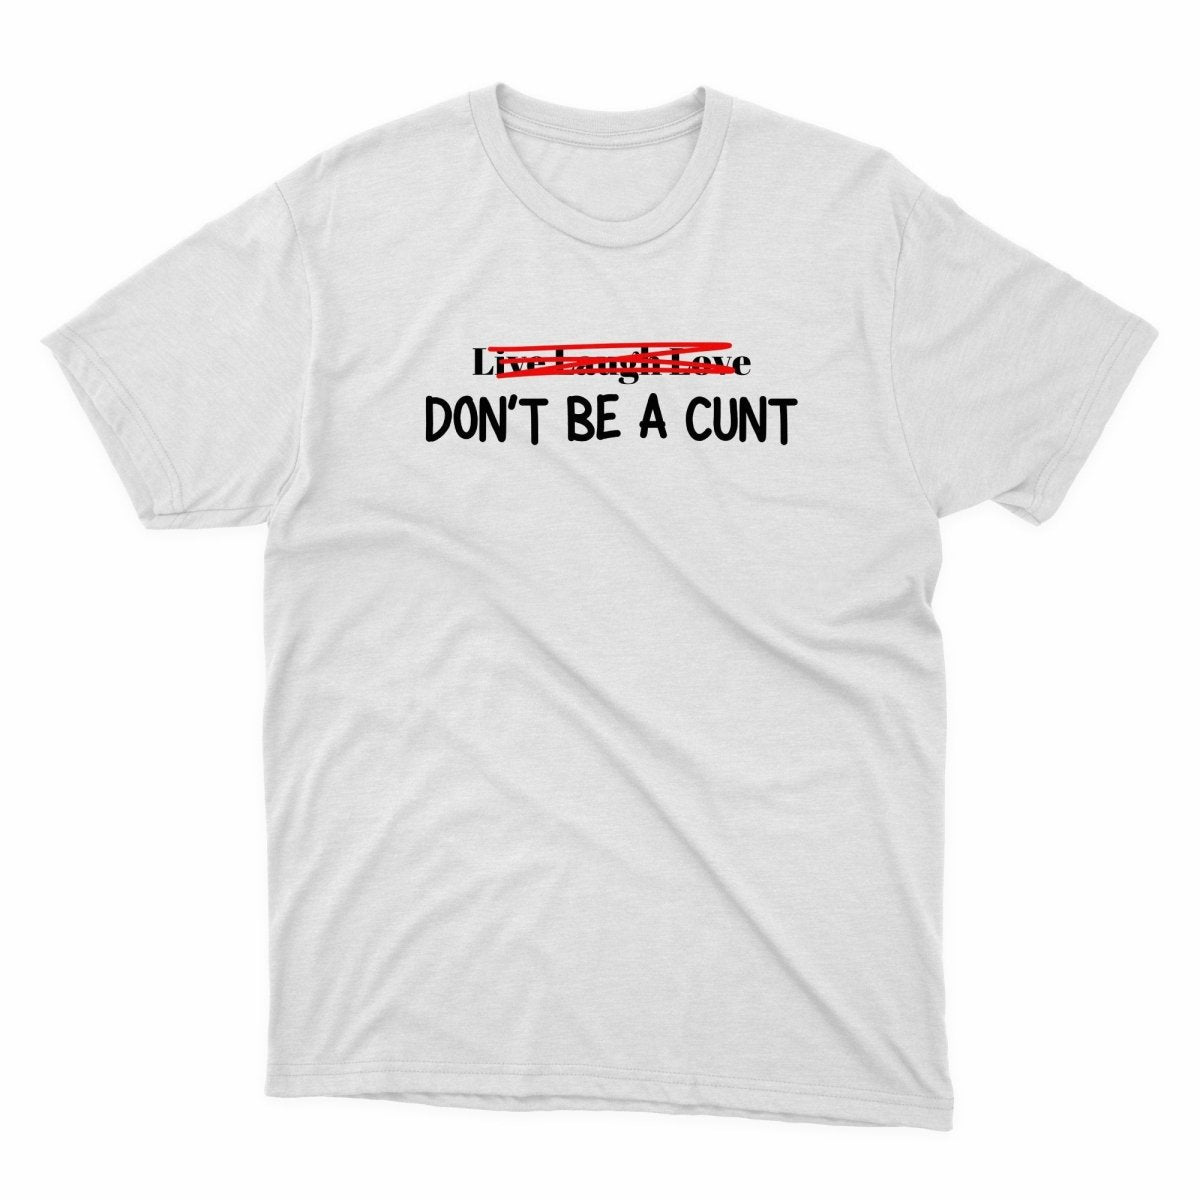 Live Laugh Don't Be A cunt Shirt - stickerbullLive Laugh Don't Be A cunt ShirtShirtsPrintifystickerbull11124902981820793337WhiteSa white t - shirt with the words don't be a gun on it